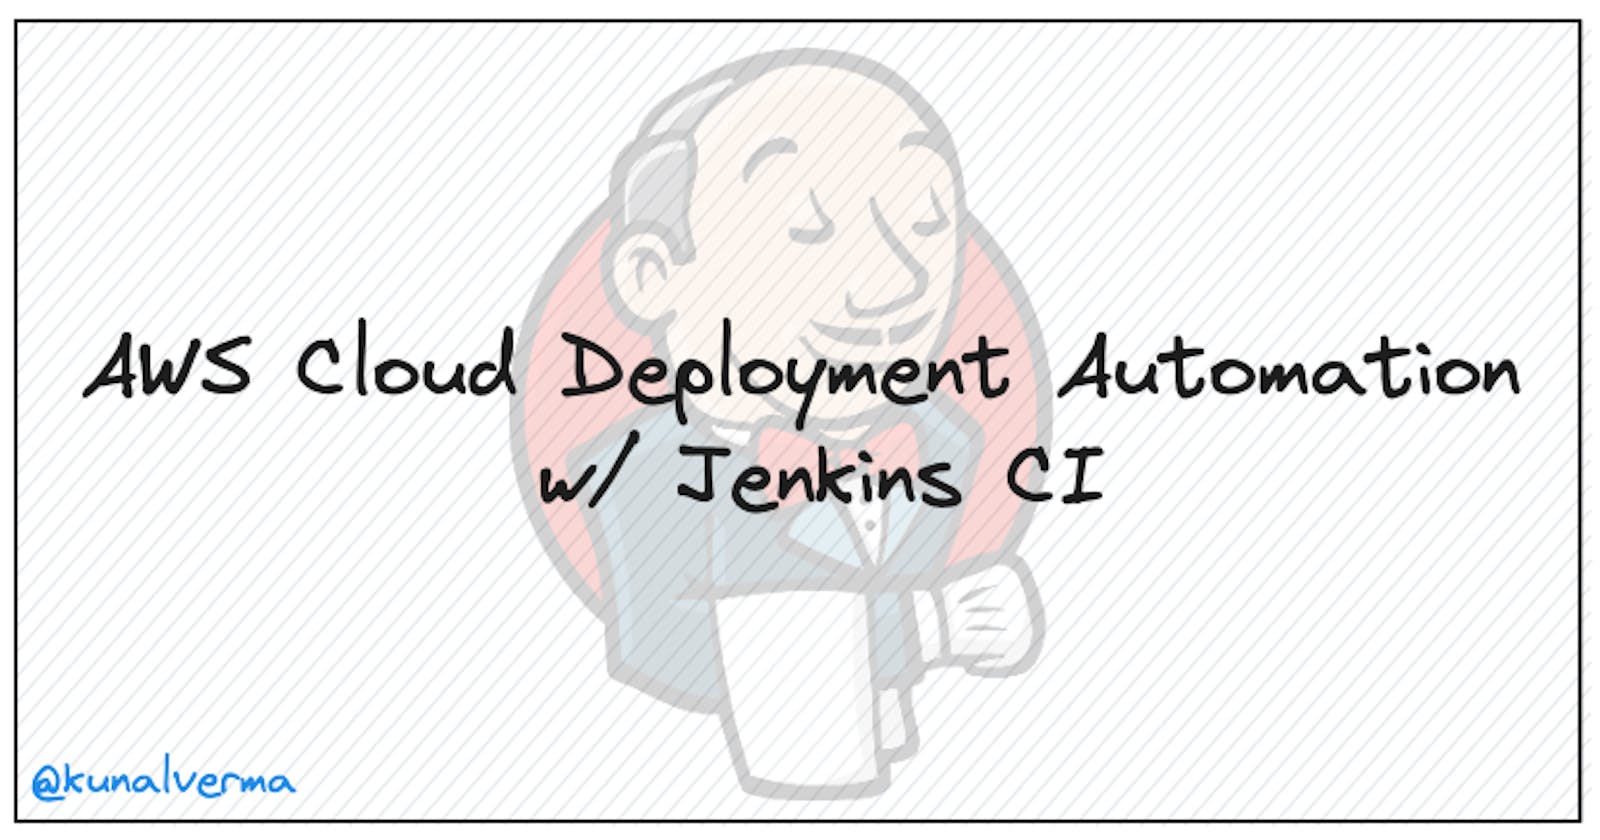 AWS Cloud Deployment Automation with Jenkins CI